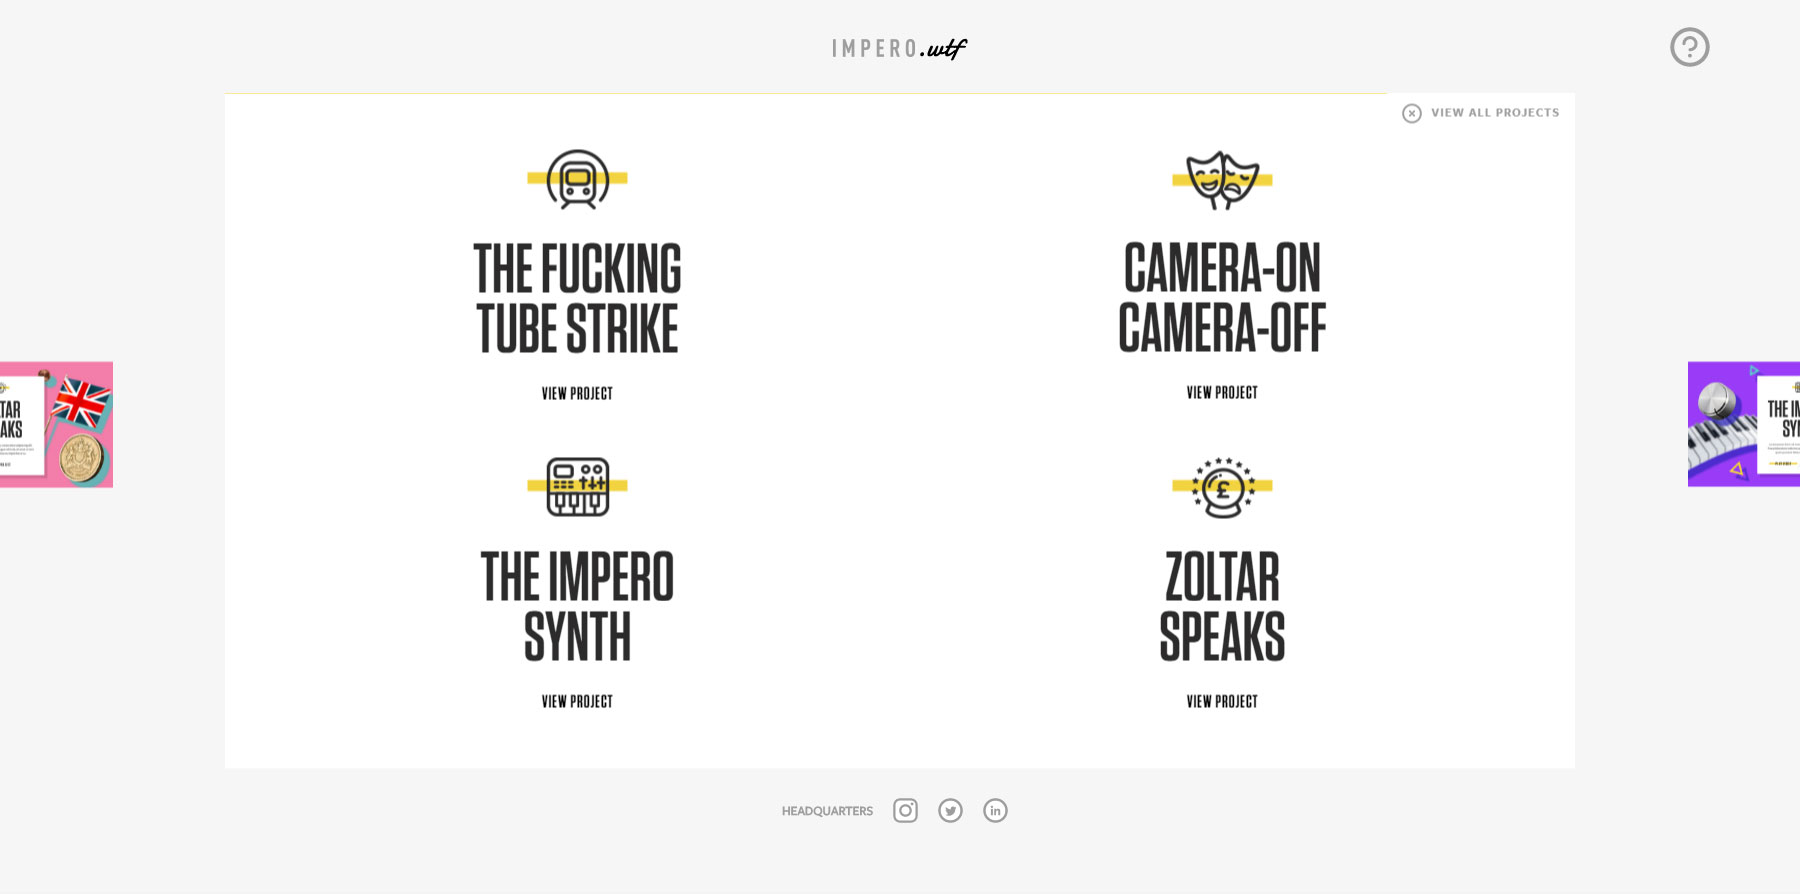 Impero.wtf - Website of the Day